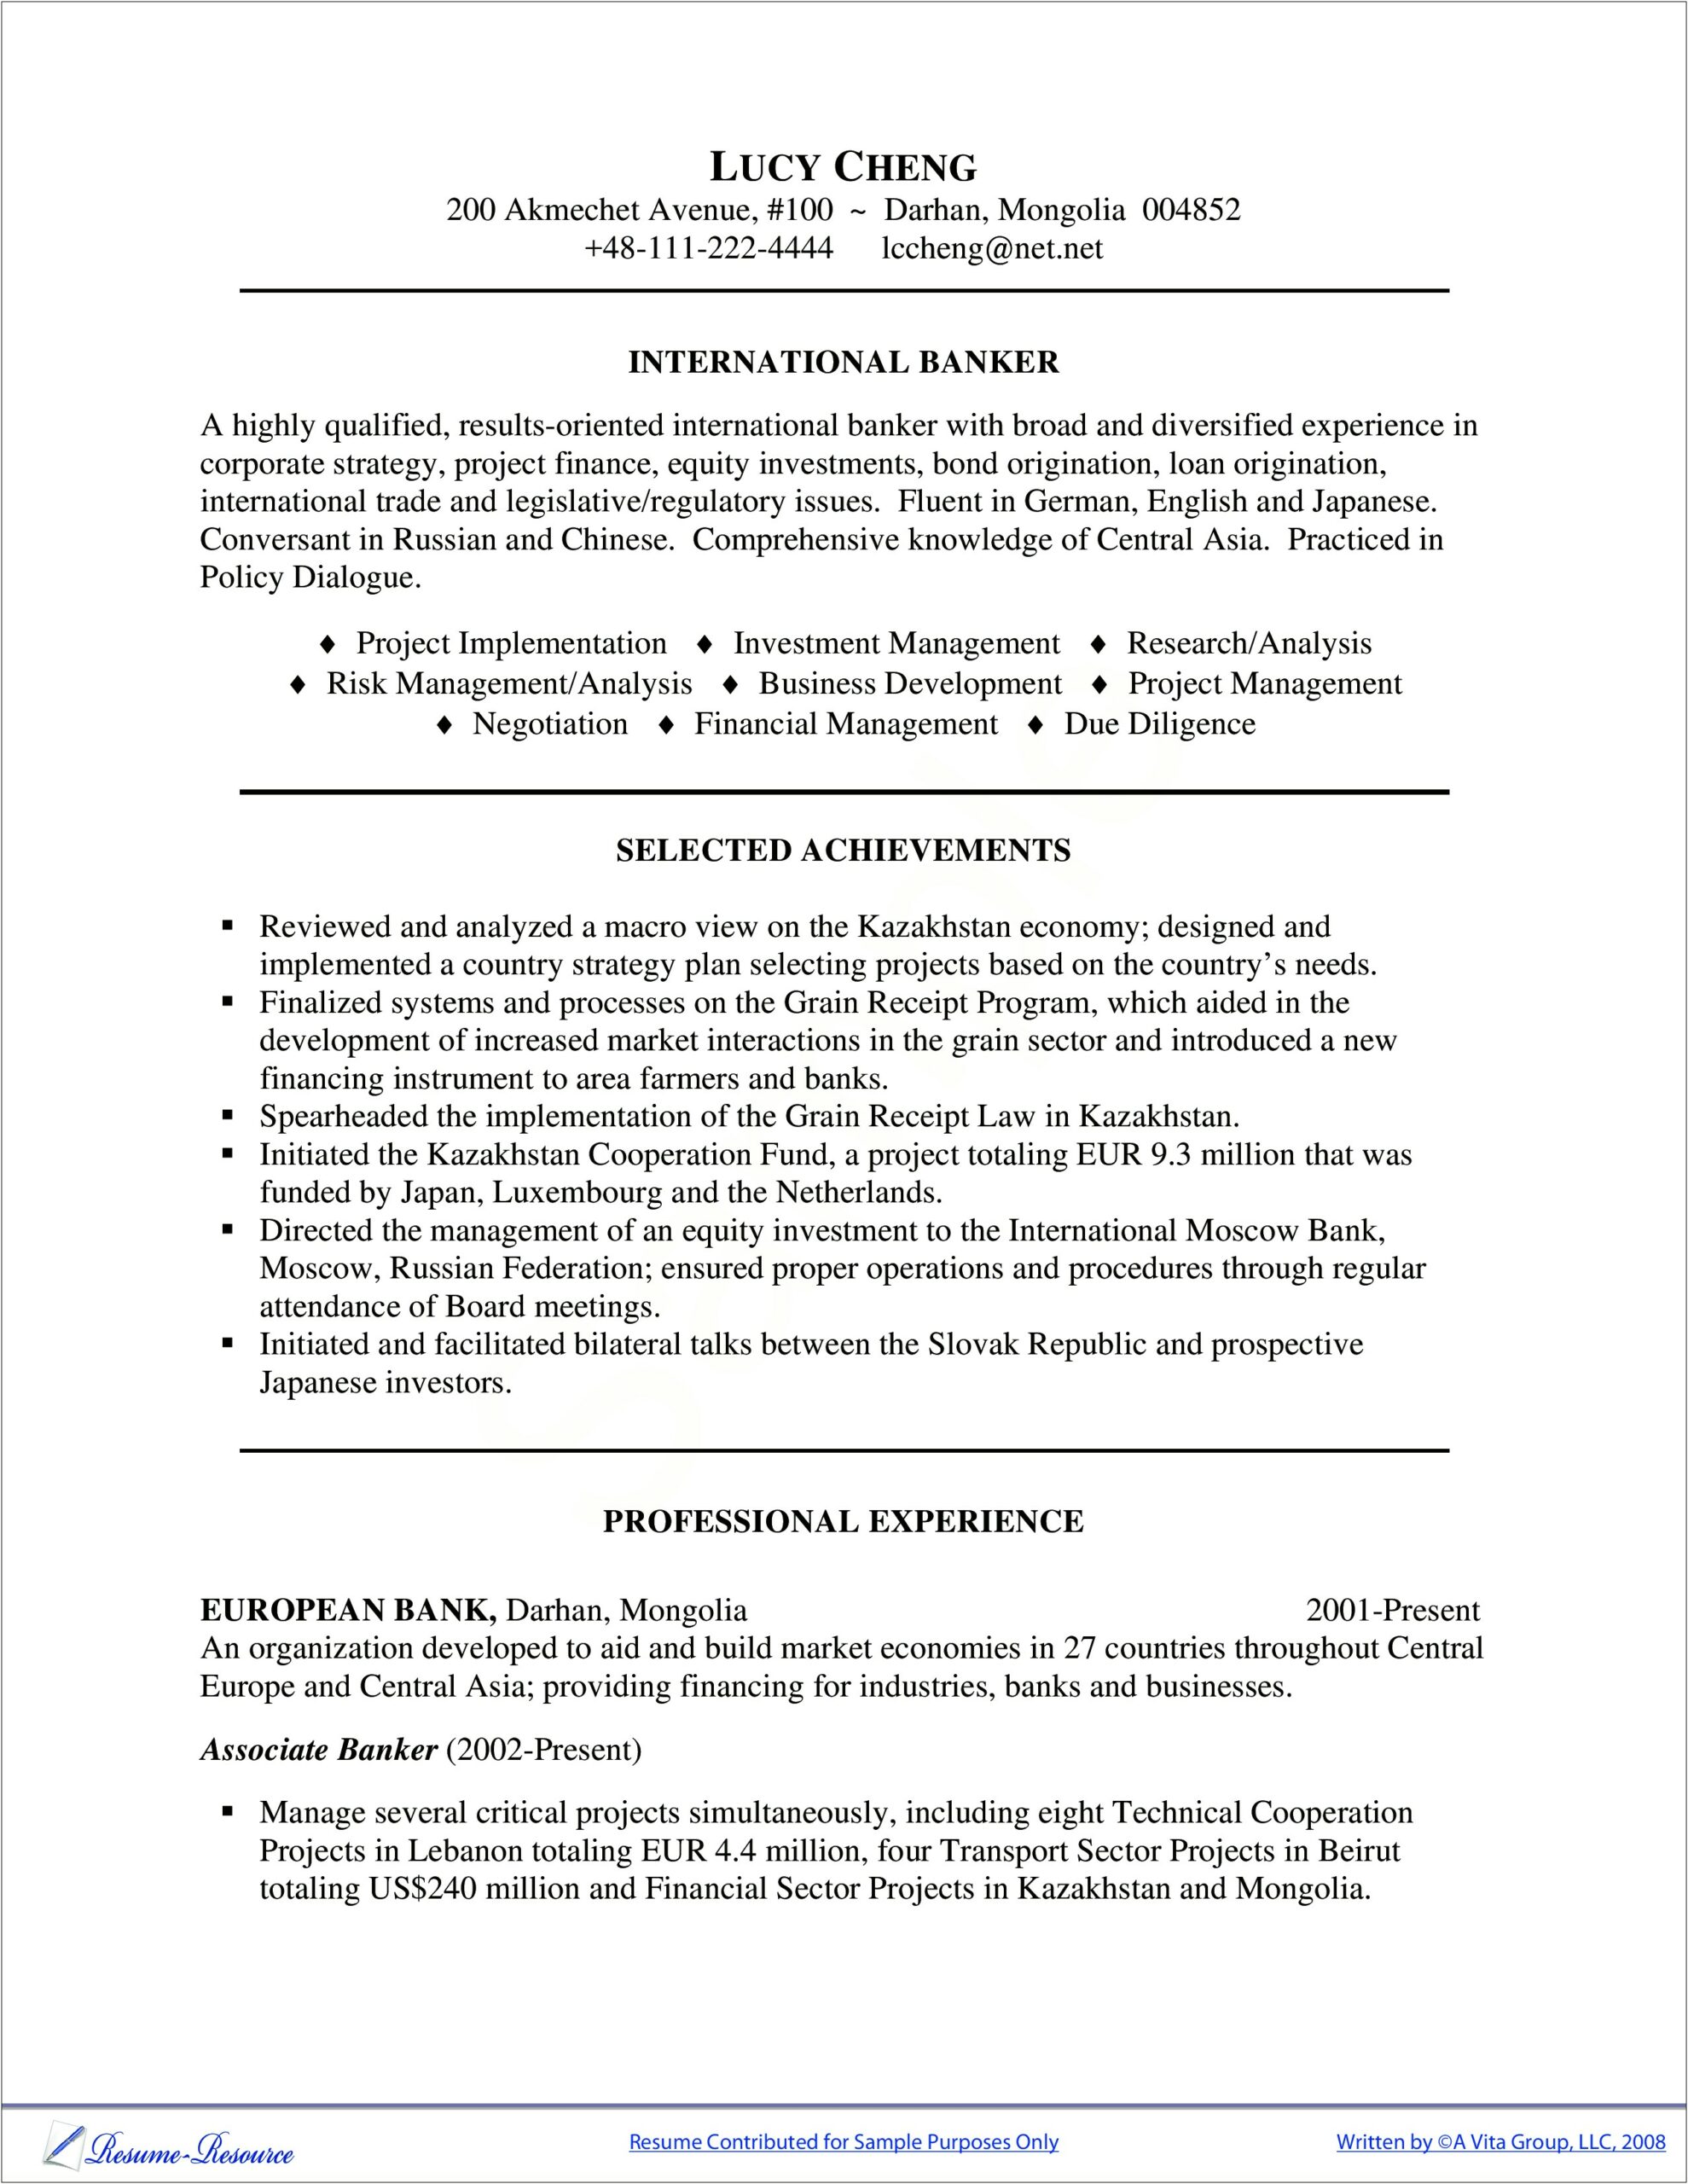 Sample Working Investment Banking Resume